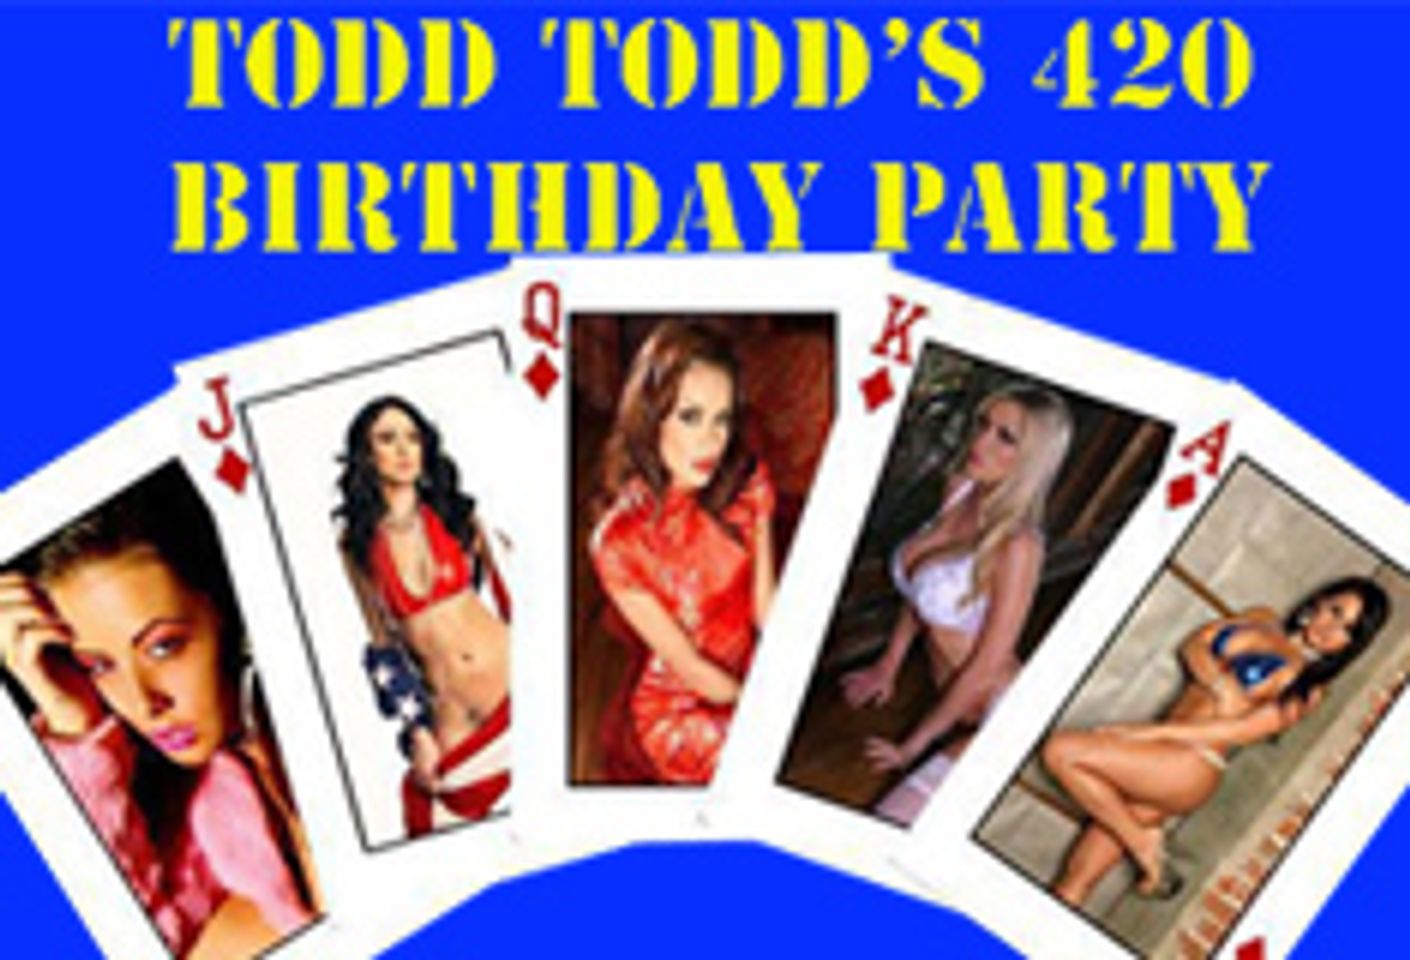 Adult Stars to Host Todd Todd's Birthday Party Sunday